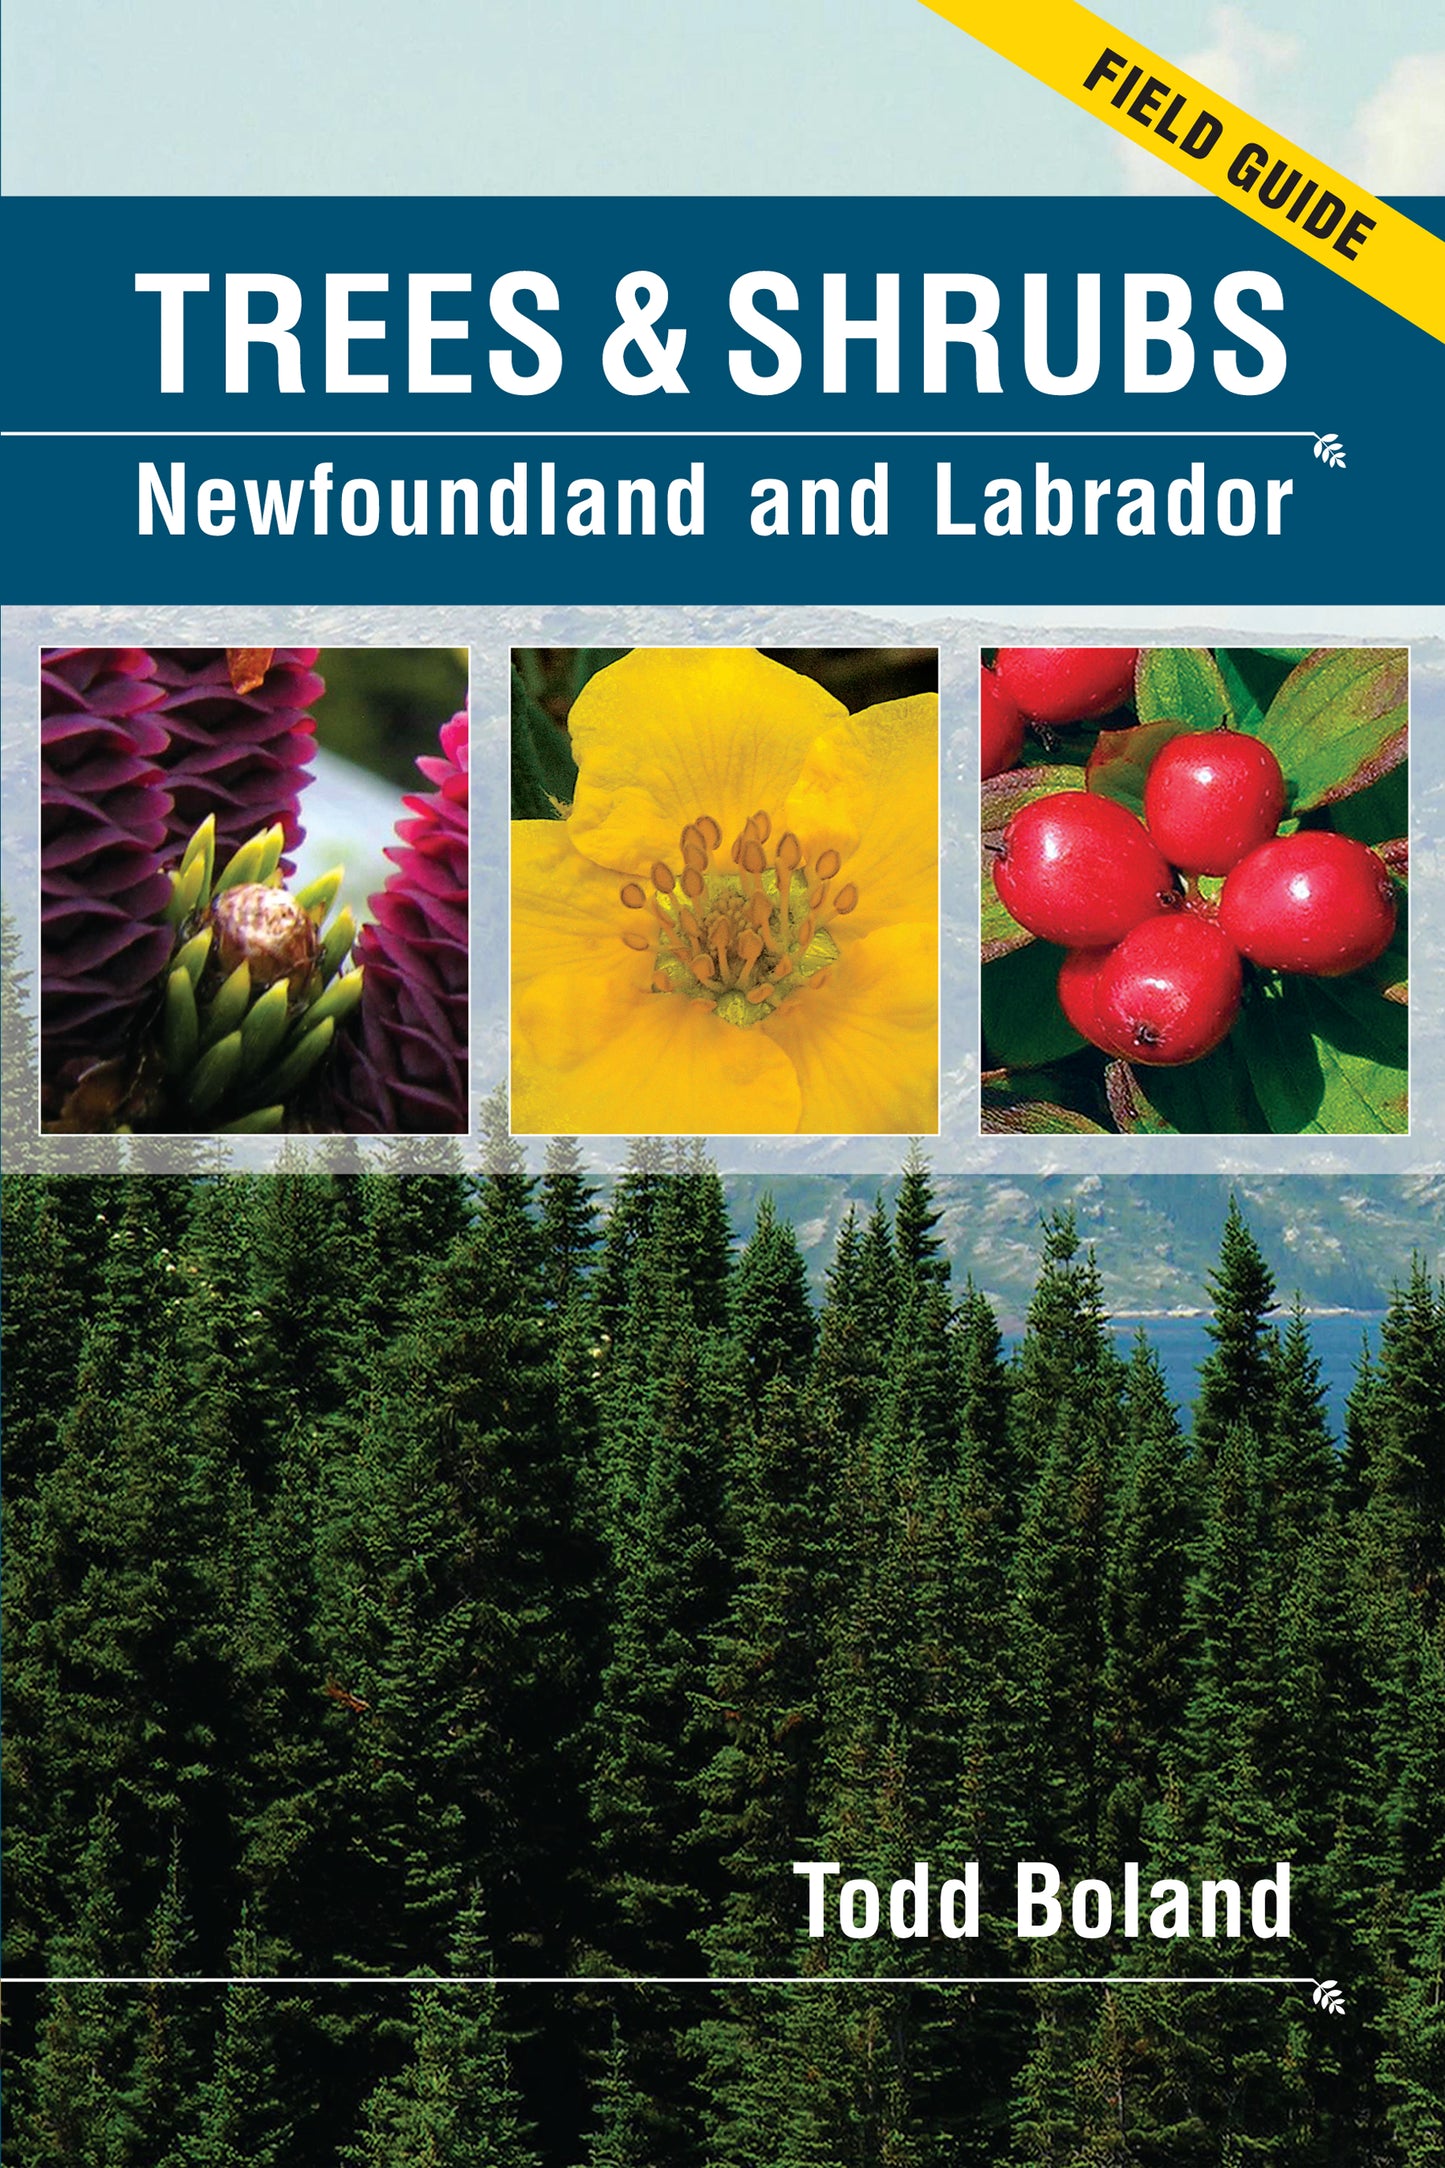 Field Guide: Trees and Shrubs of Newfoundland by Todd Boland